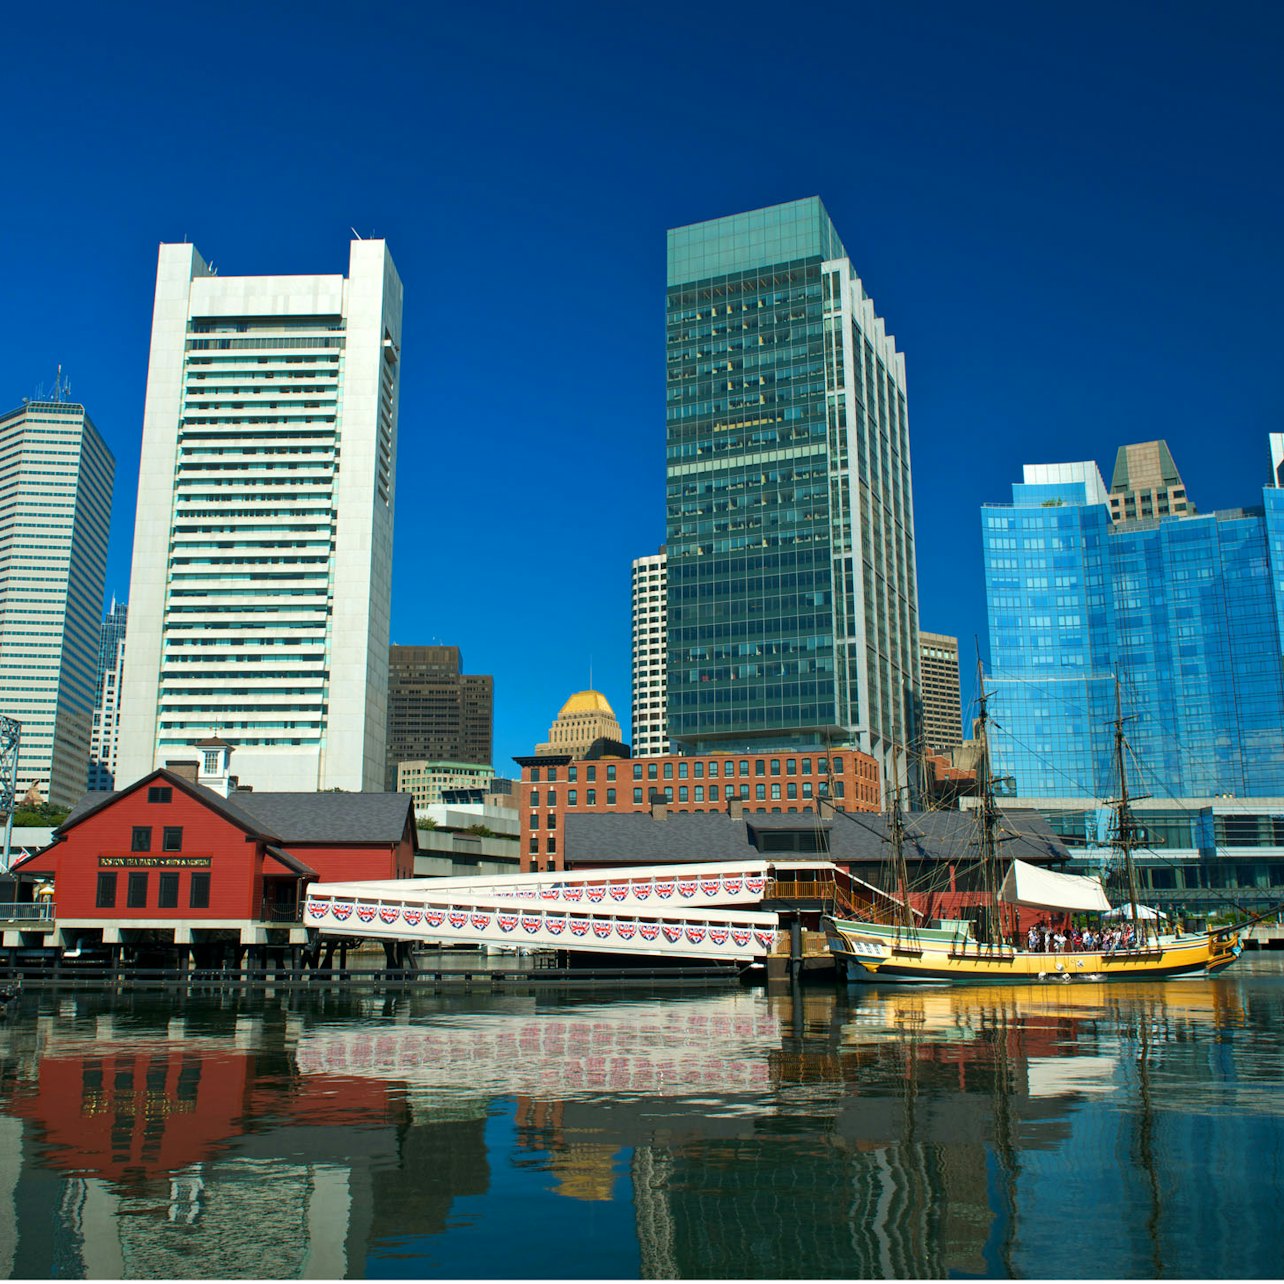 Boston Tea Party Ships & Museum - Accommodations in Boston